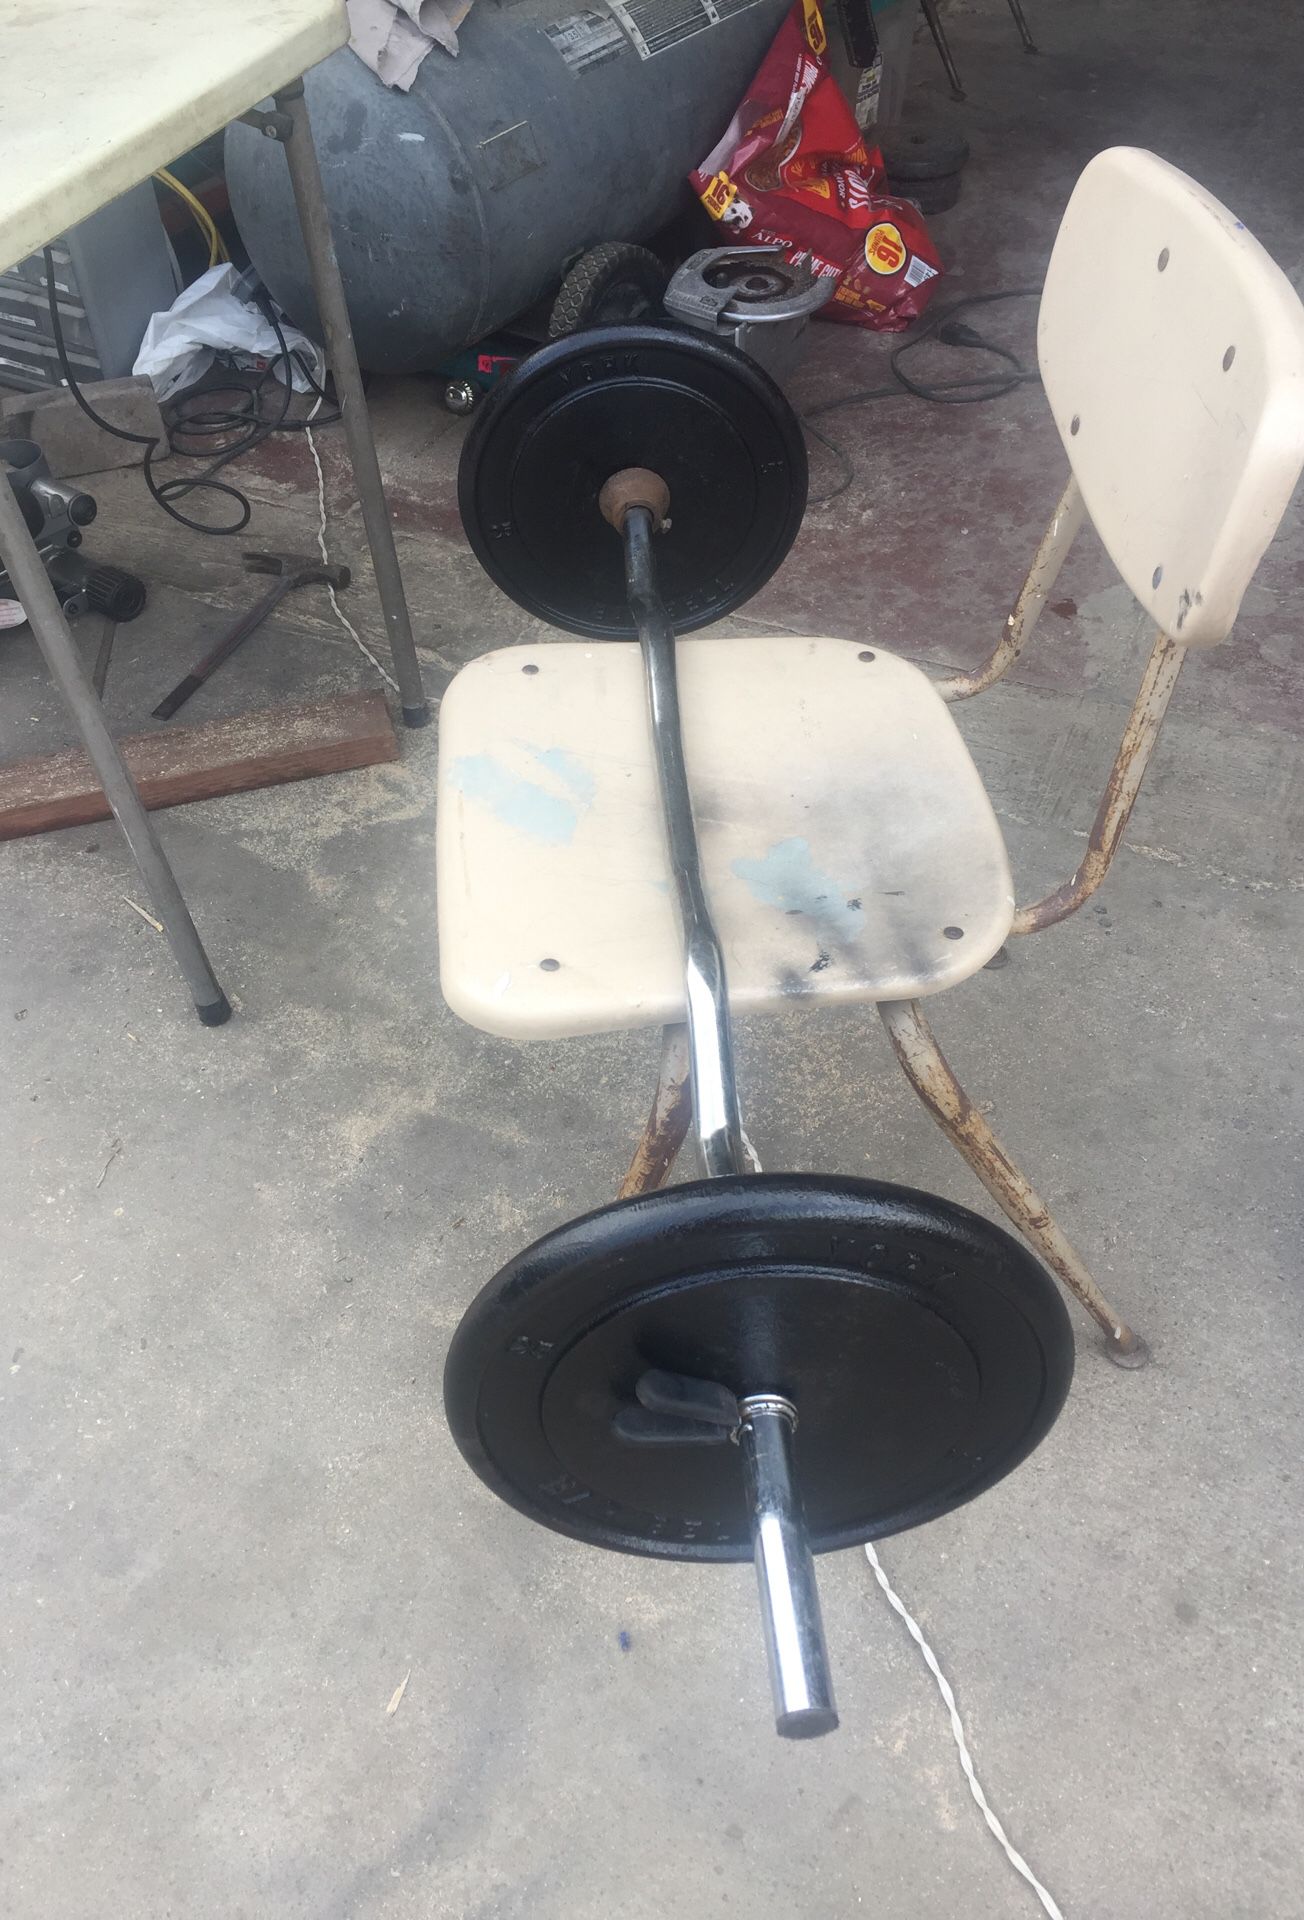 Standard curl bar with weights